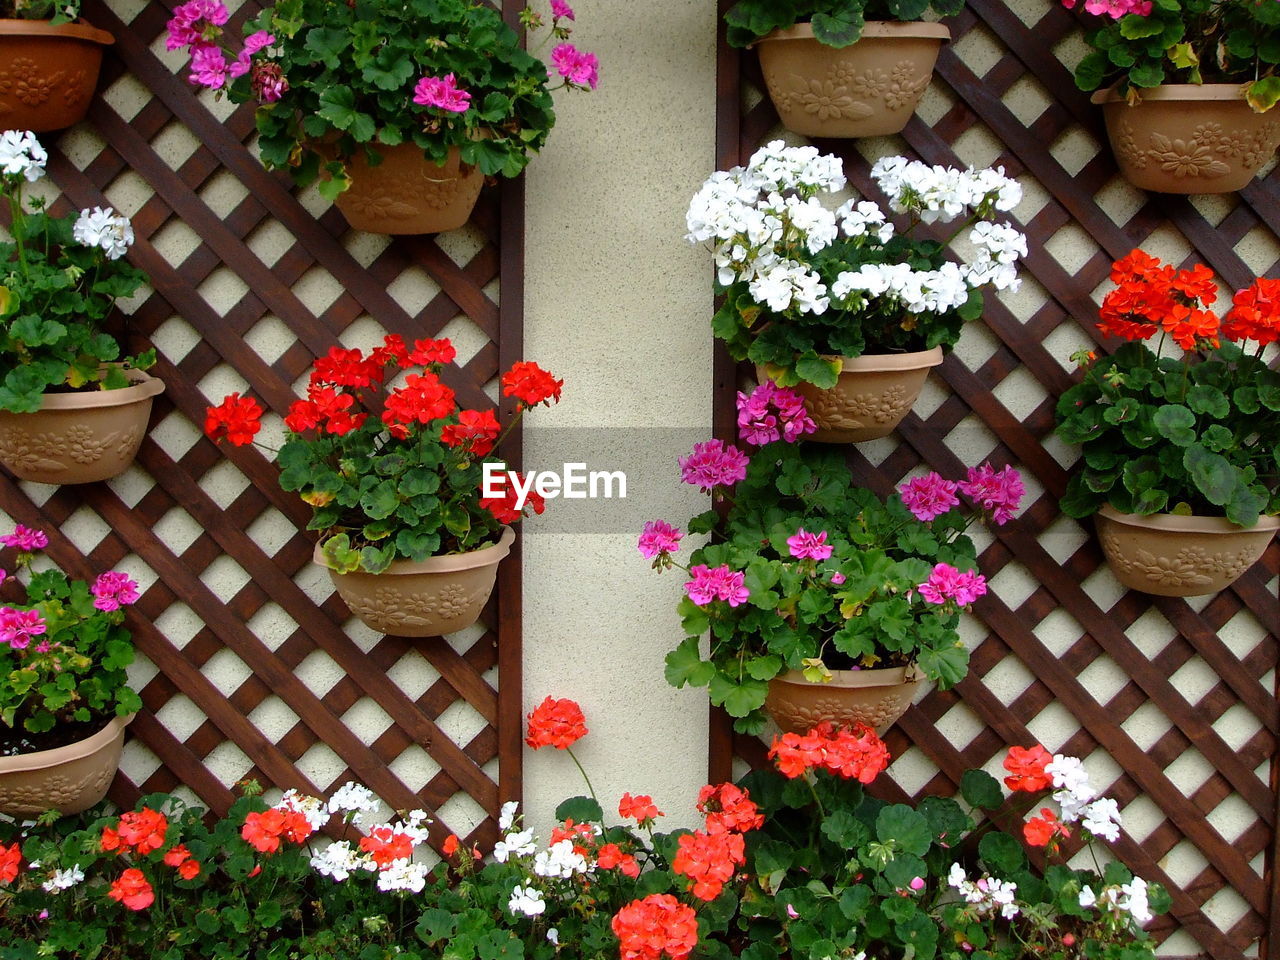 HIGH ANGLE VIEW OF FLOWERING PLANTS IN POTTED PLANT